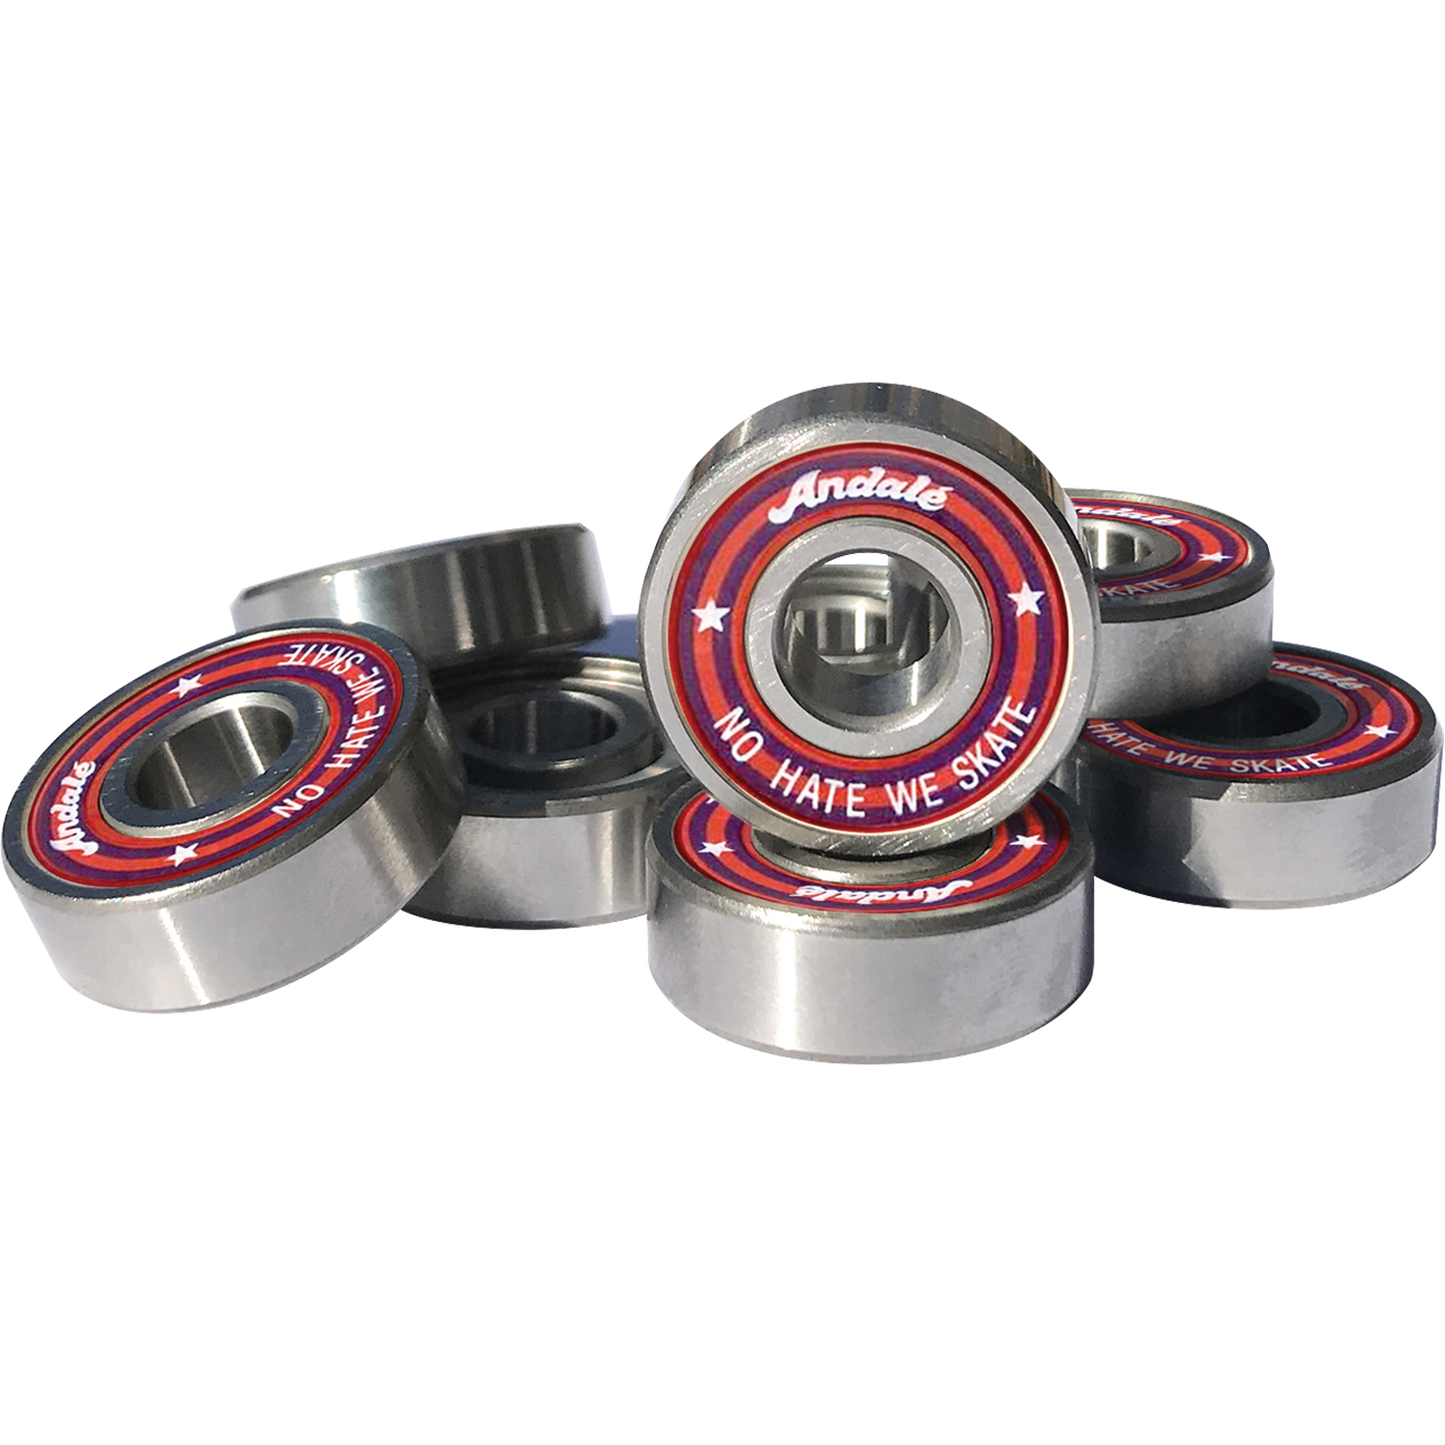 Andale No Hate We Skate Bearings White Single Set - 8 Pieces